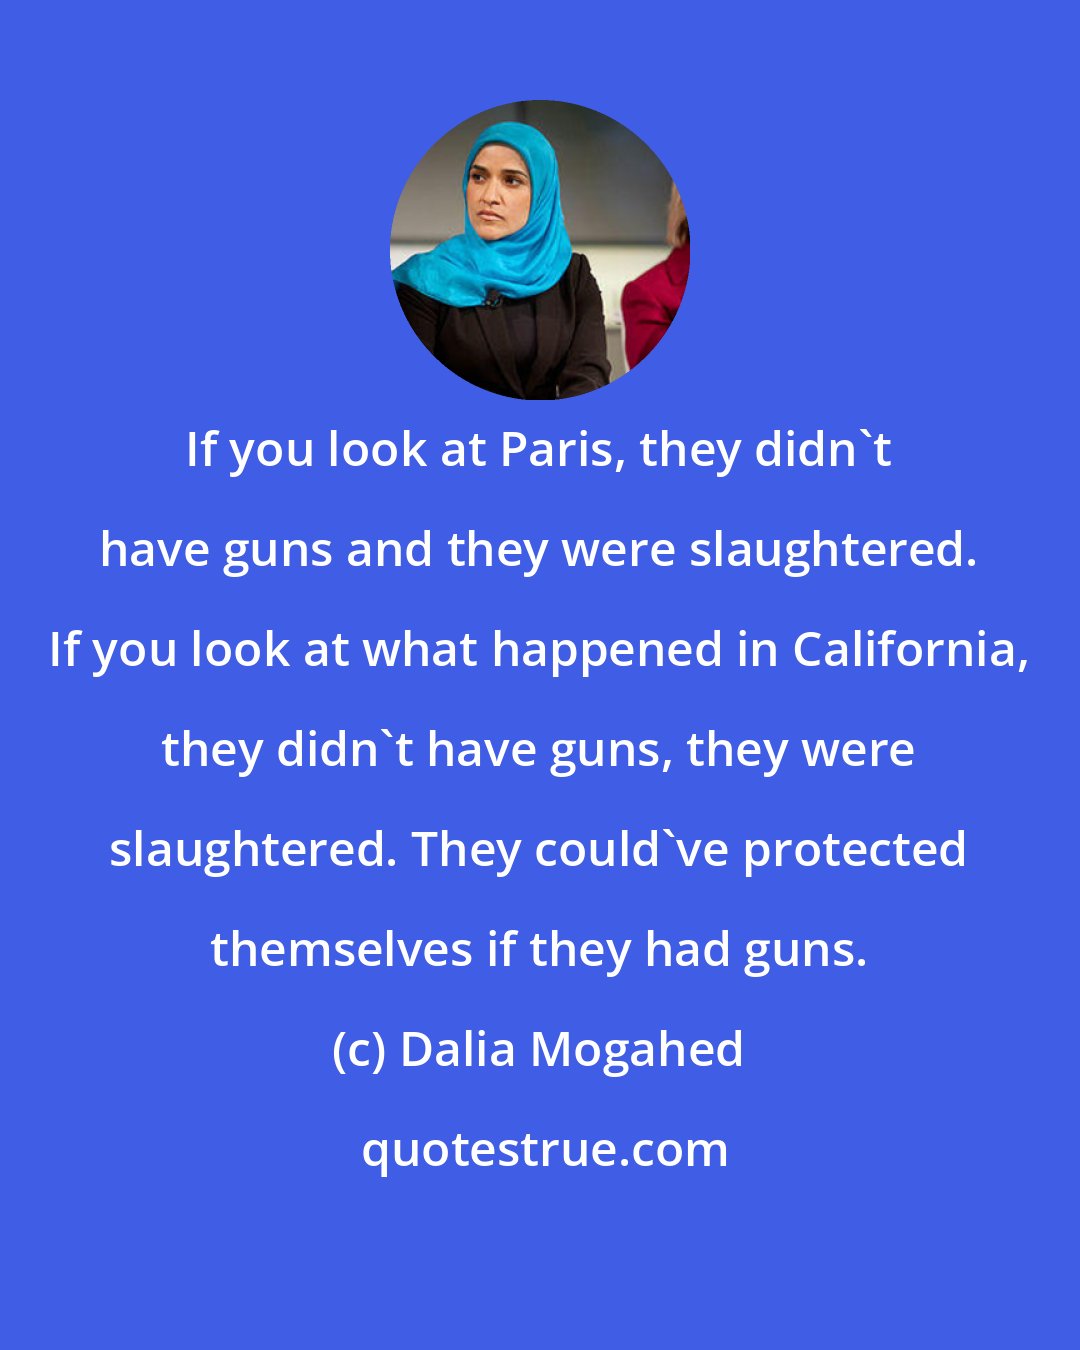 Dalia Mogahed: If you look at Paris, they didn't have guns and they were slaughtered. If you look at what happened in California, they didn't have guns, they were slaughtered. They could've protected themselves if they had guns.